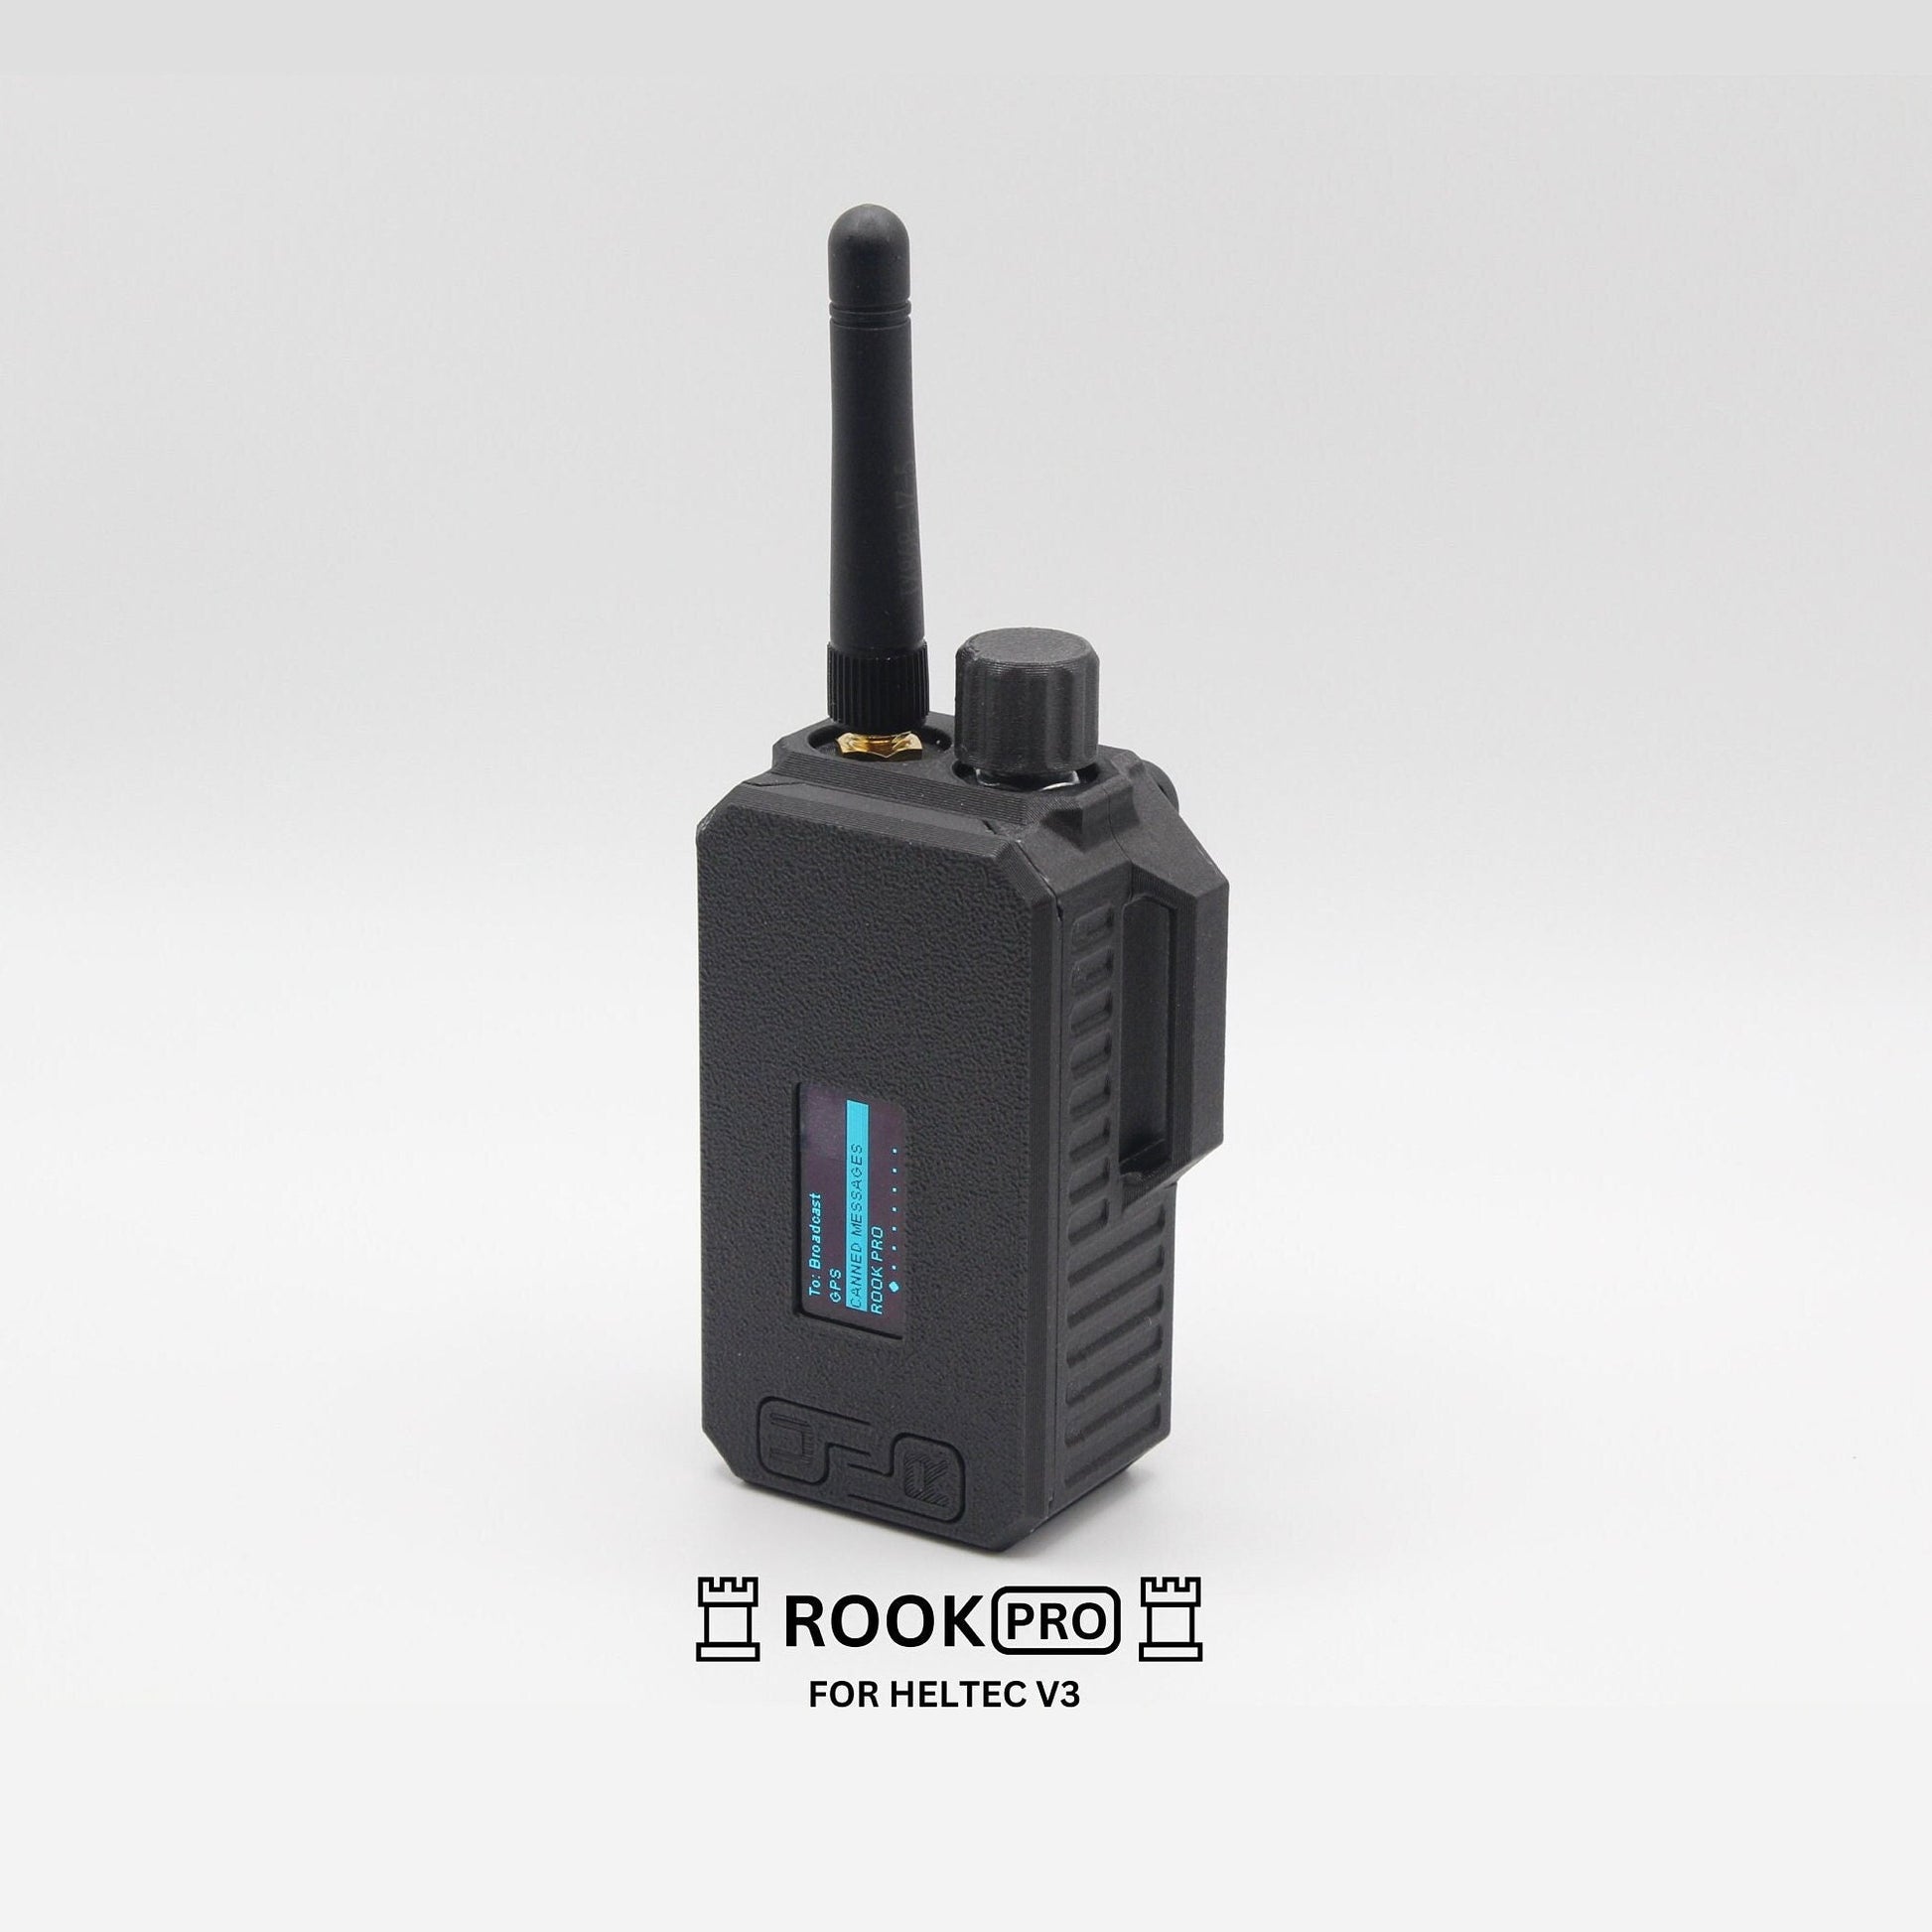 Rook pro from the front